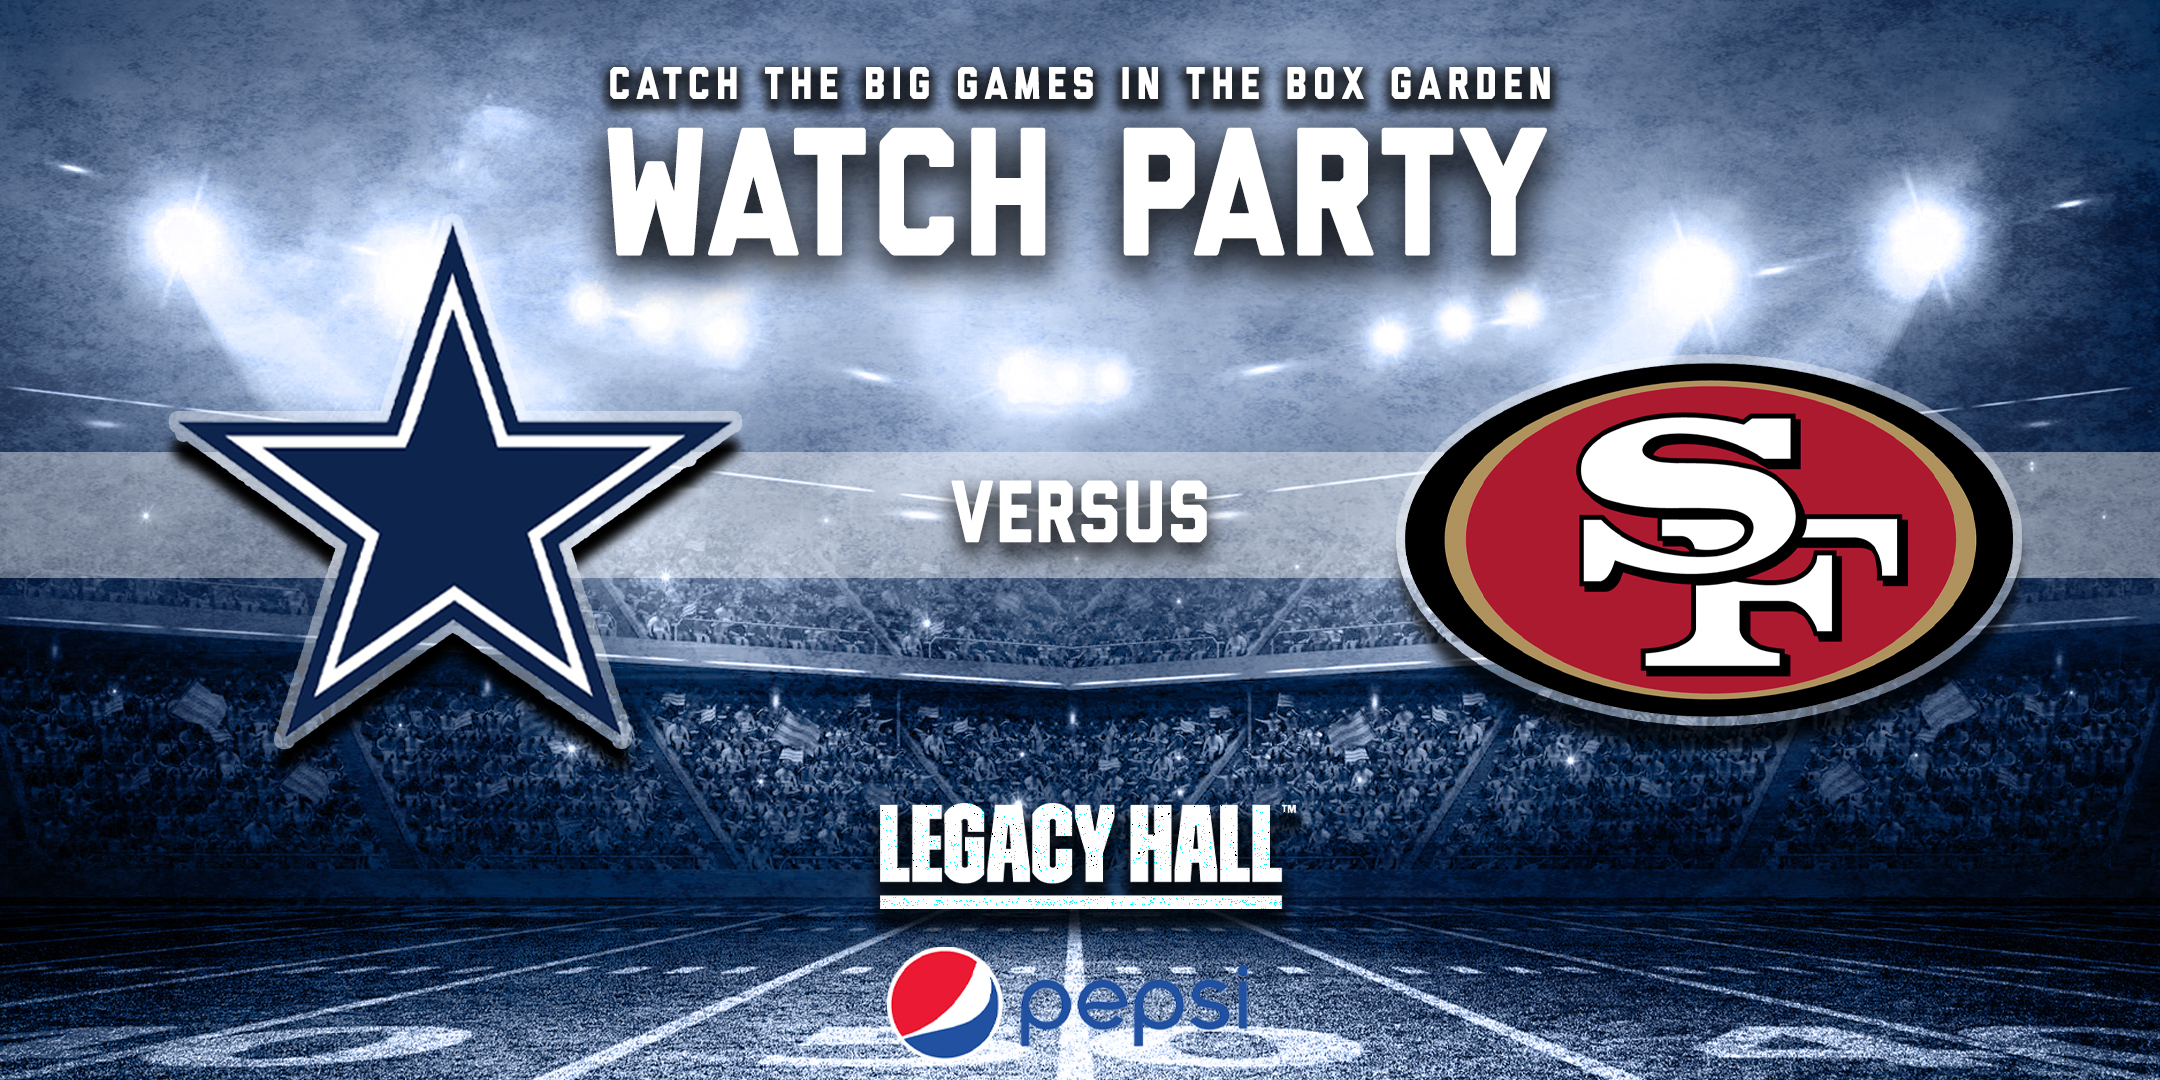 Cowboys vs. 49ers Watch Party